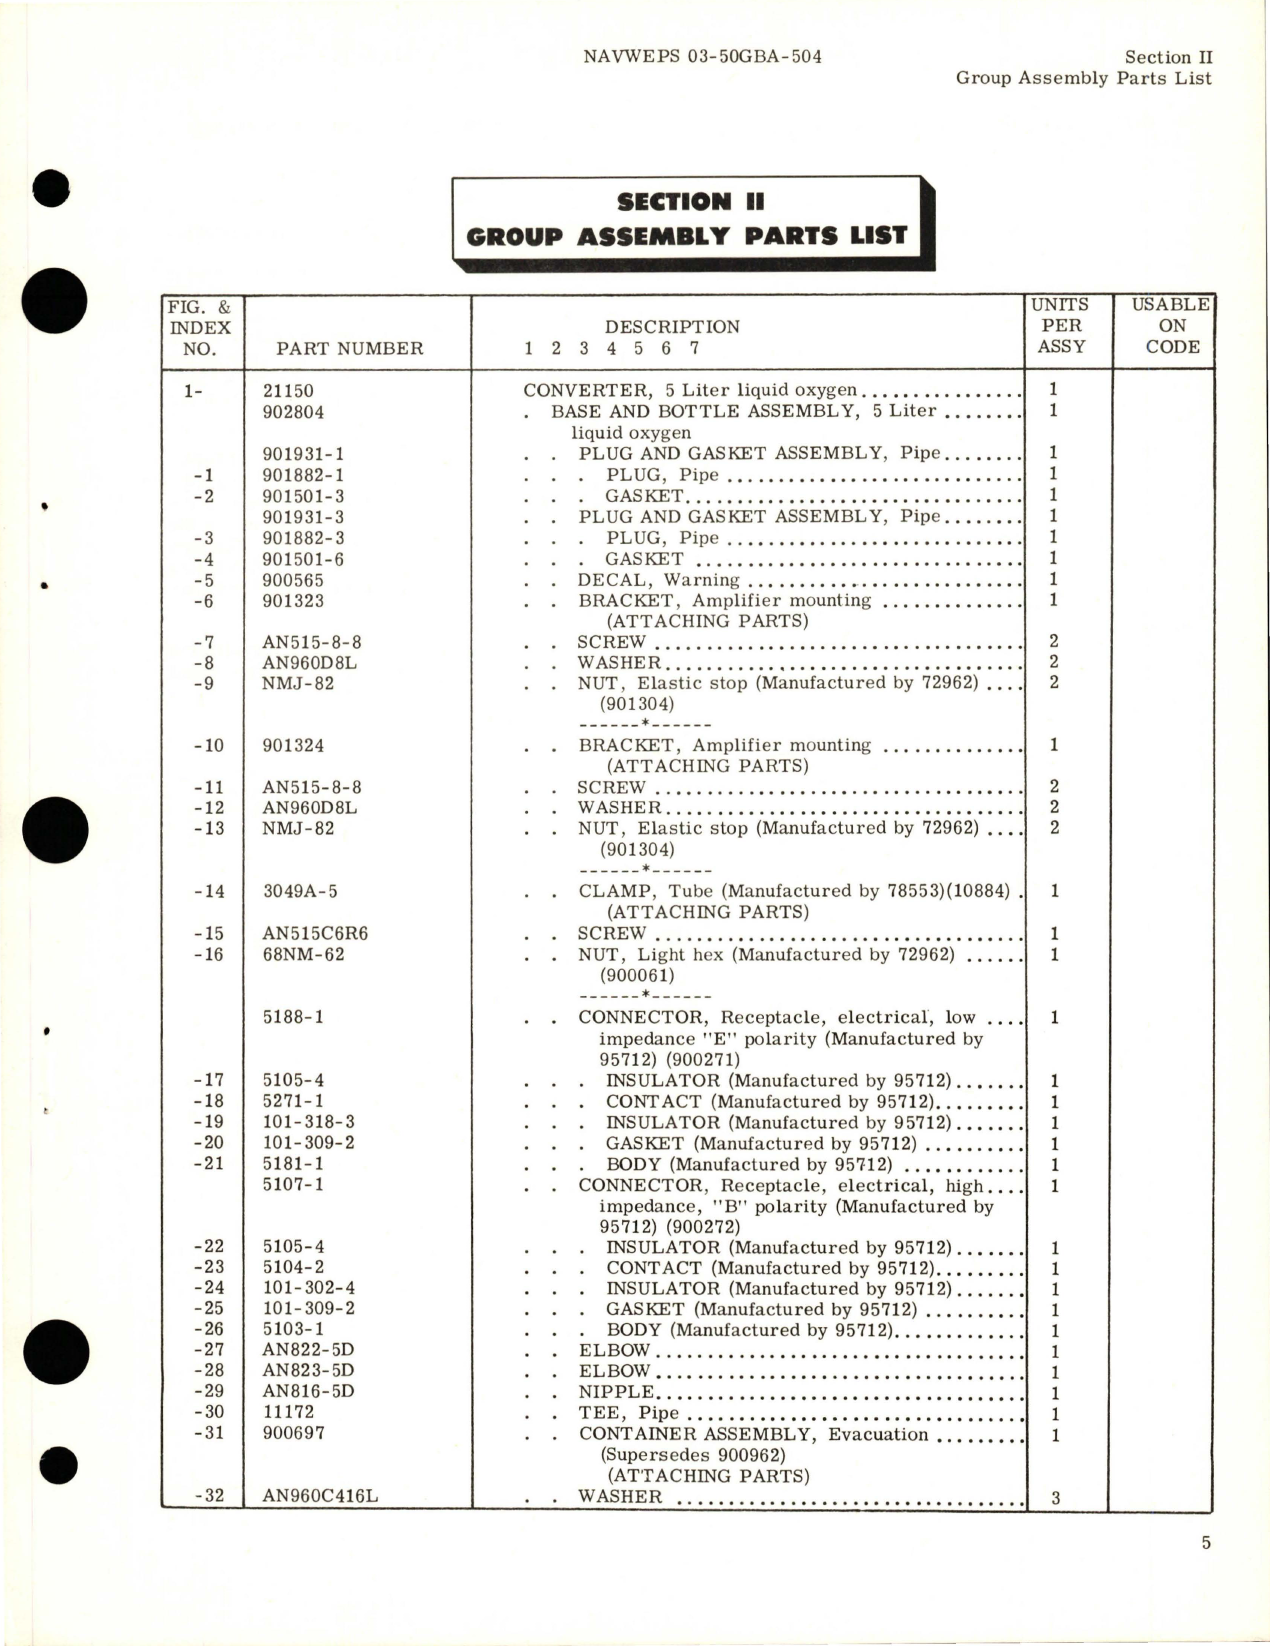 Sample page 7 from AirCorps Library document: Illustrated Parts Breakdown for 5-Liter Liquid Oxygen Converter - Part 21150 